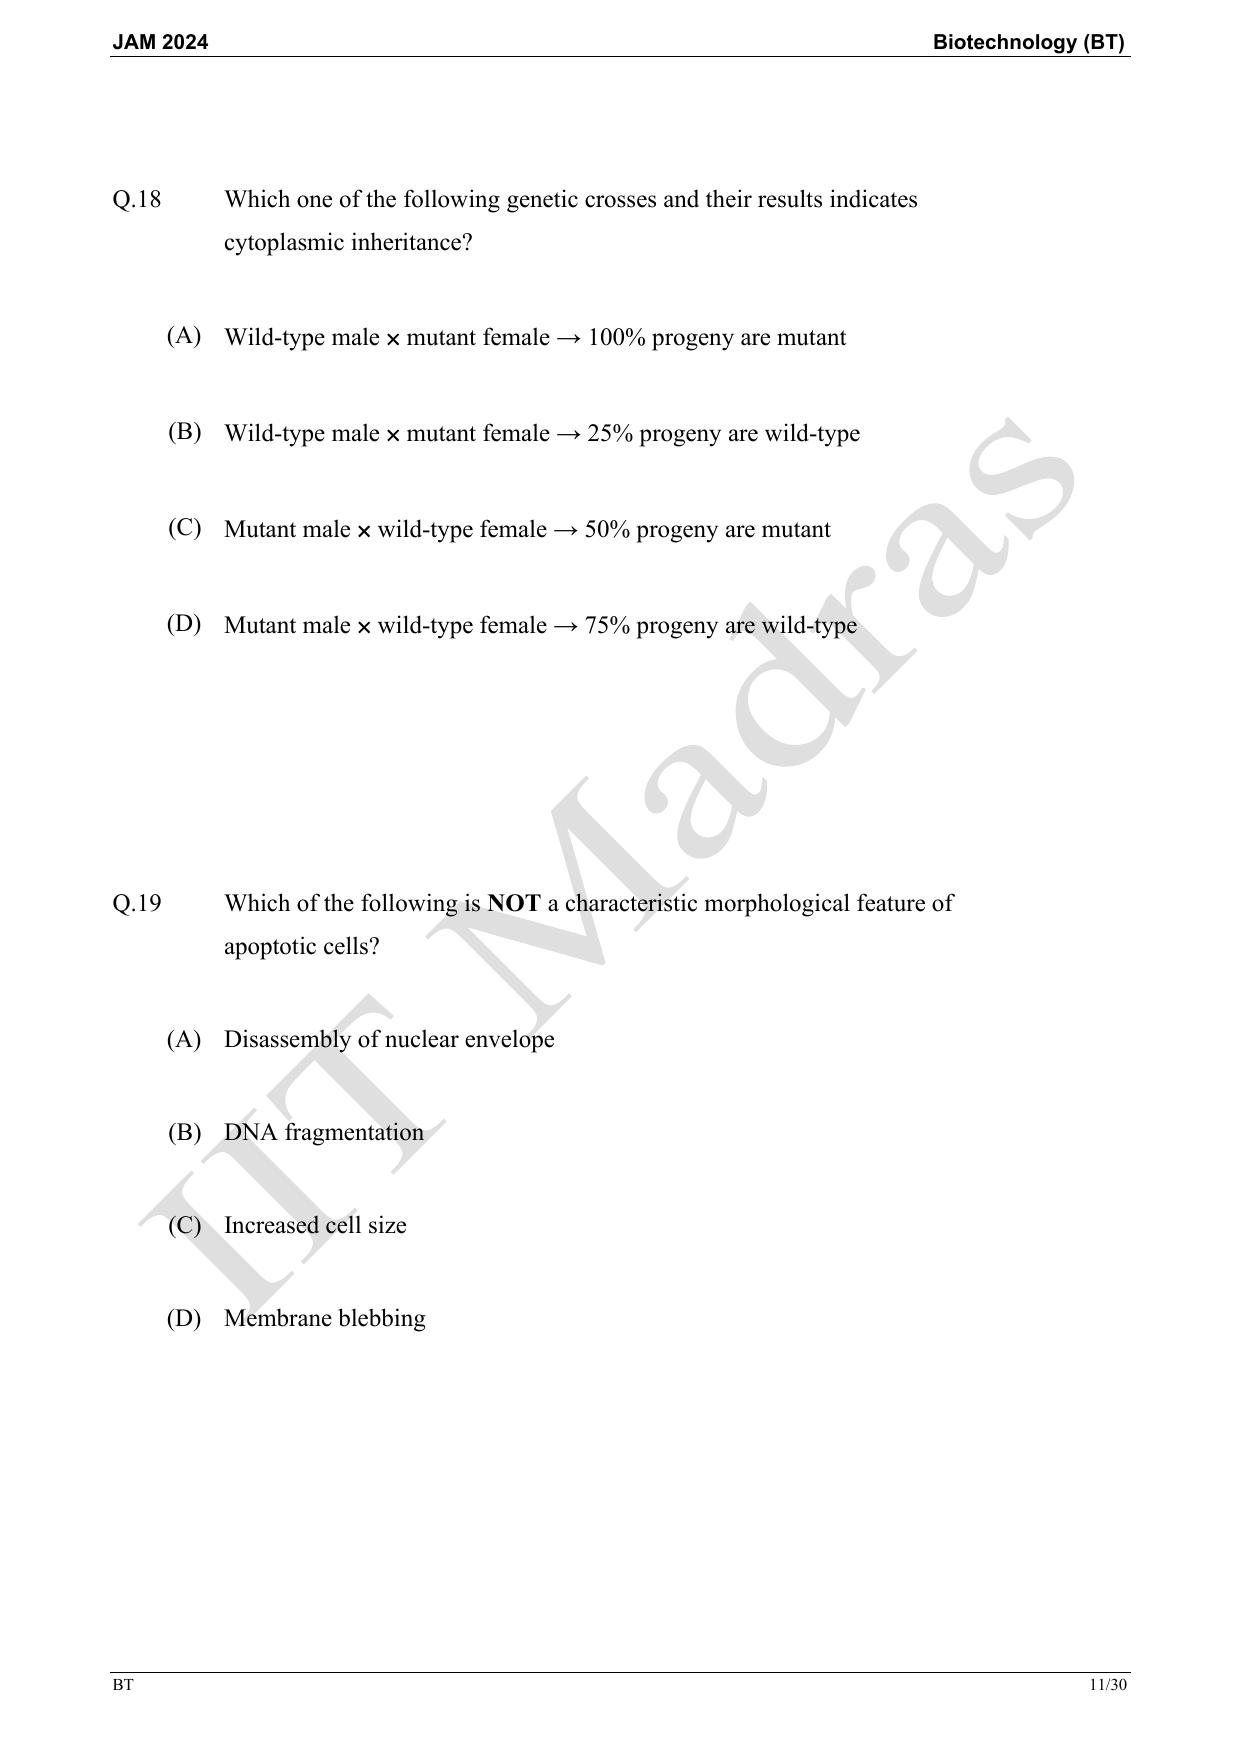 IIT JAM 2024 Biotechnology (BT) Master Question Paper - Page 11